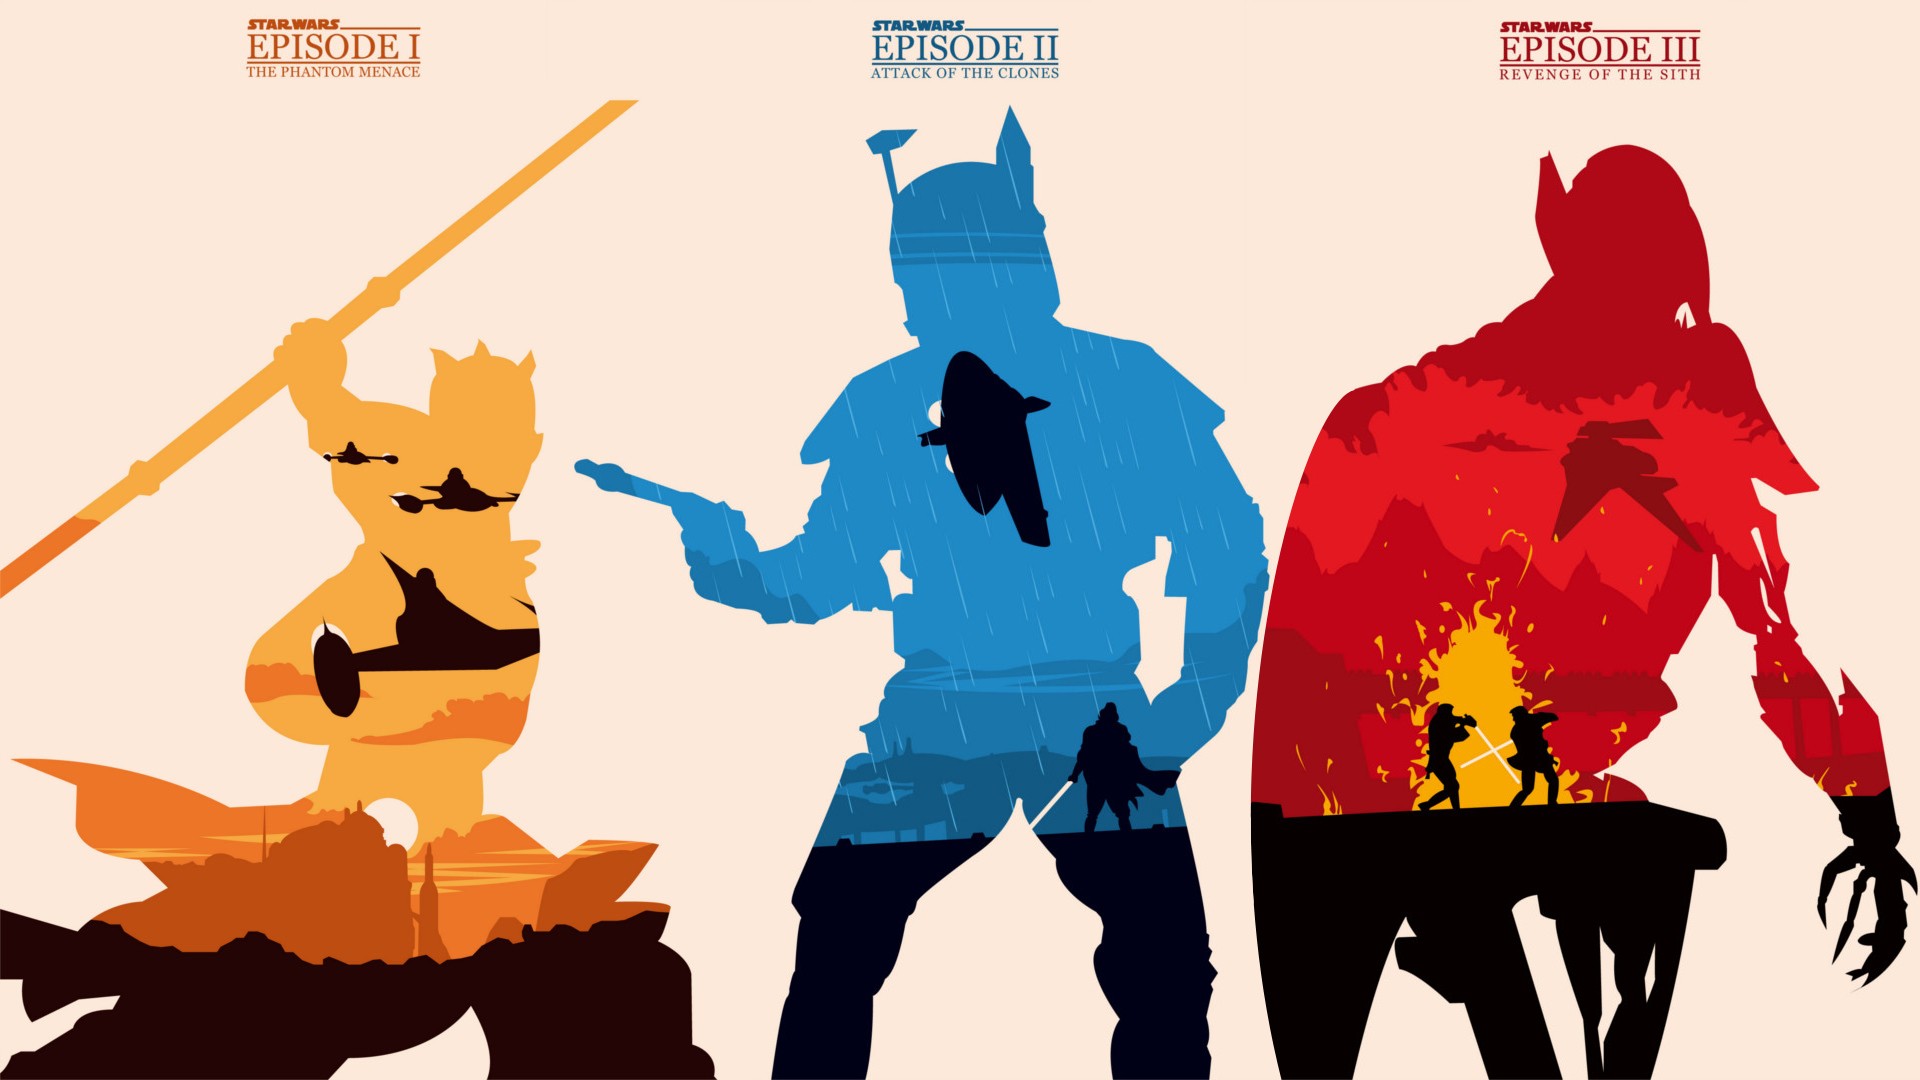 General 1920x1080 Darth Maul Jango Fett Star Wars red blue yellow silhouette beige background collage science fiction Star Wars Villains simple background Star Wars: Episode I - The Phantom Menace Star Wars: Episode II - Attack of the Clones Star Wars: Episode III - The Revenge of the Sith movies